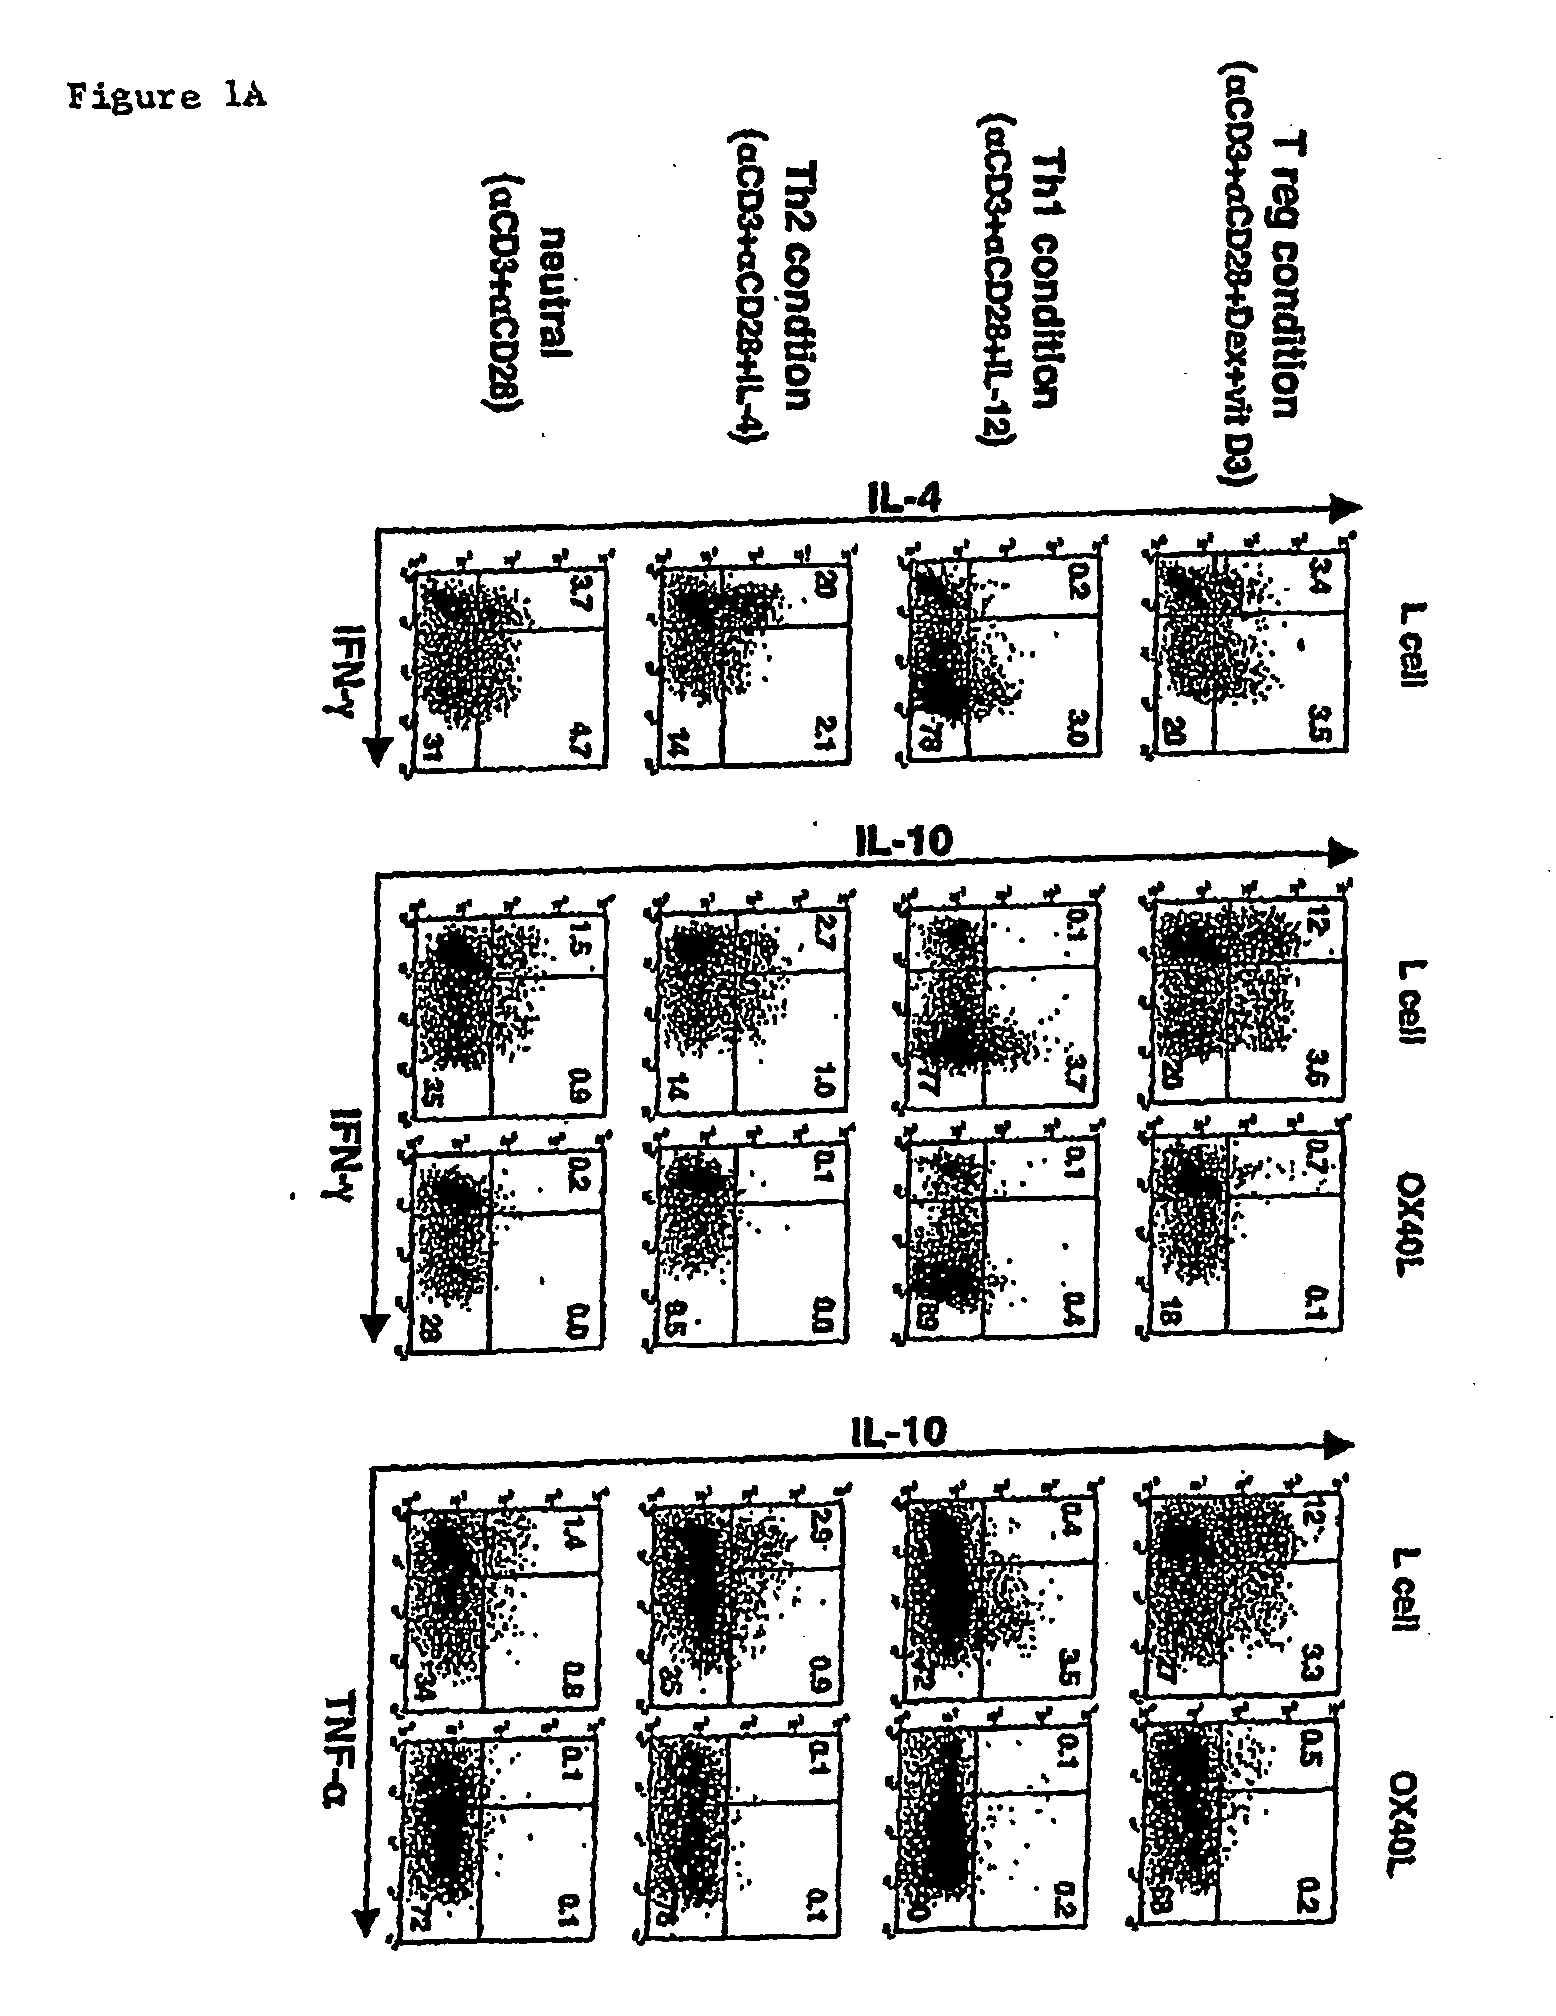 Methods to Treat Disease States by Influencing the Signaling of Ox-40-Receptors and High Throughput Screening Methods for Identifying Substances Therefor